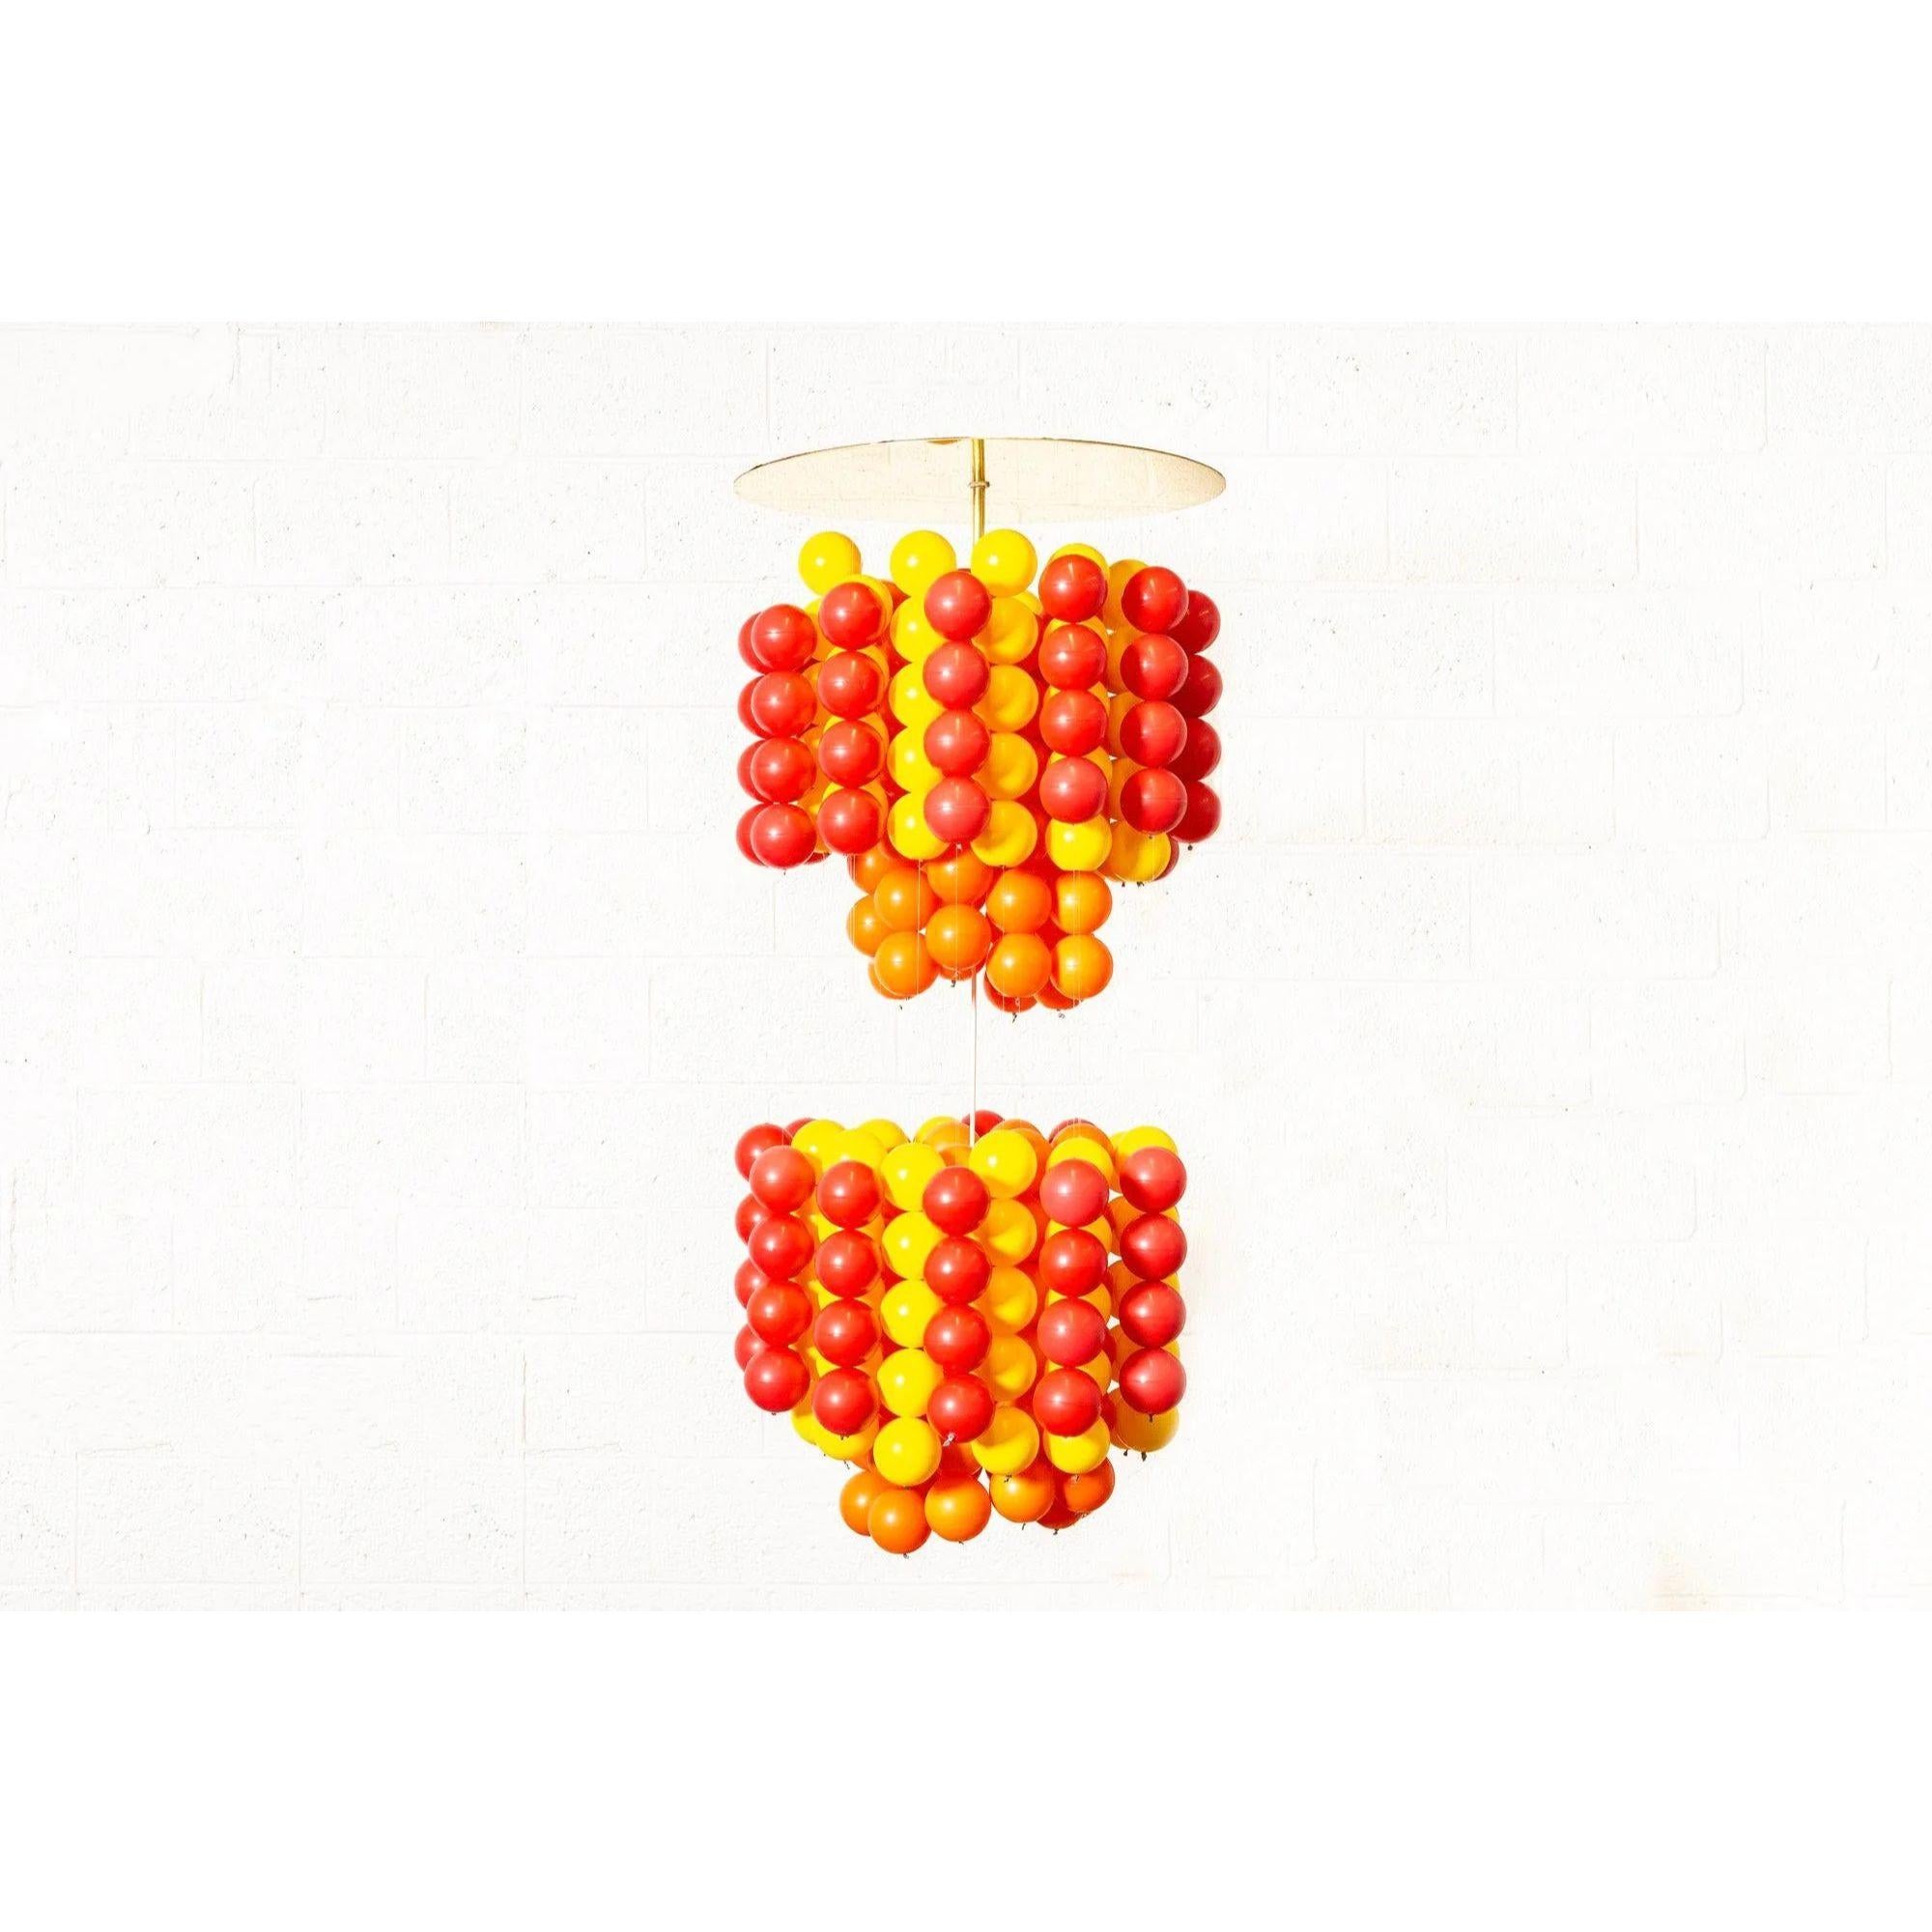 This large 50” midcentury Space Age multicolored ball chandelier pendant in the manner of Verner Panton is circa 1970 and has incredible Space Age style. The design features layers of red, orange and yellow nylon plastic balls suspended on nylon